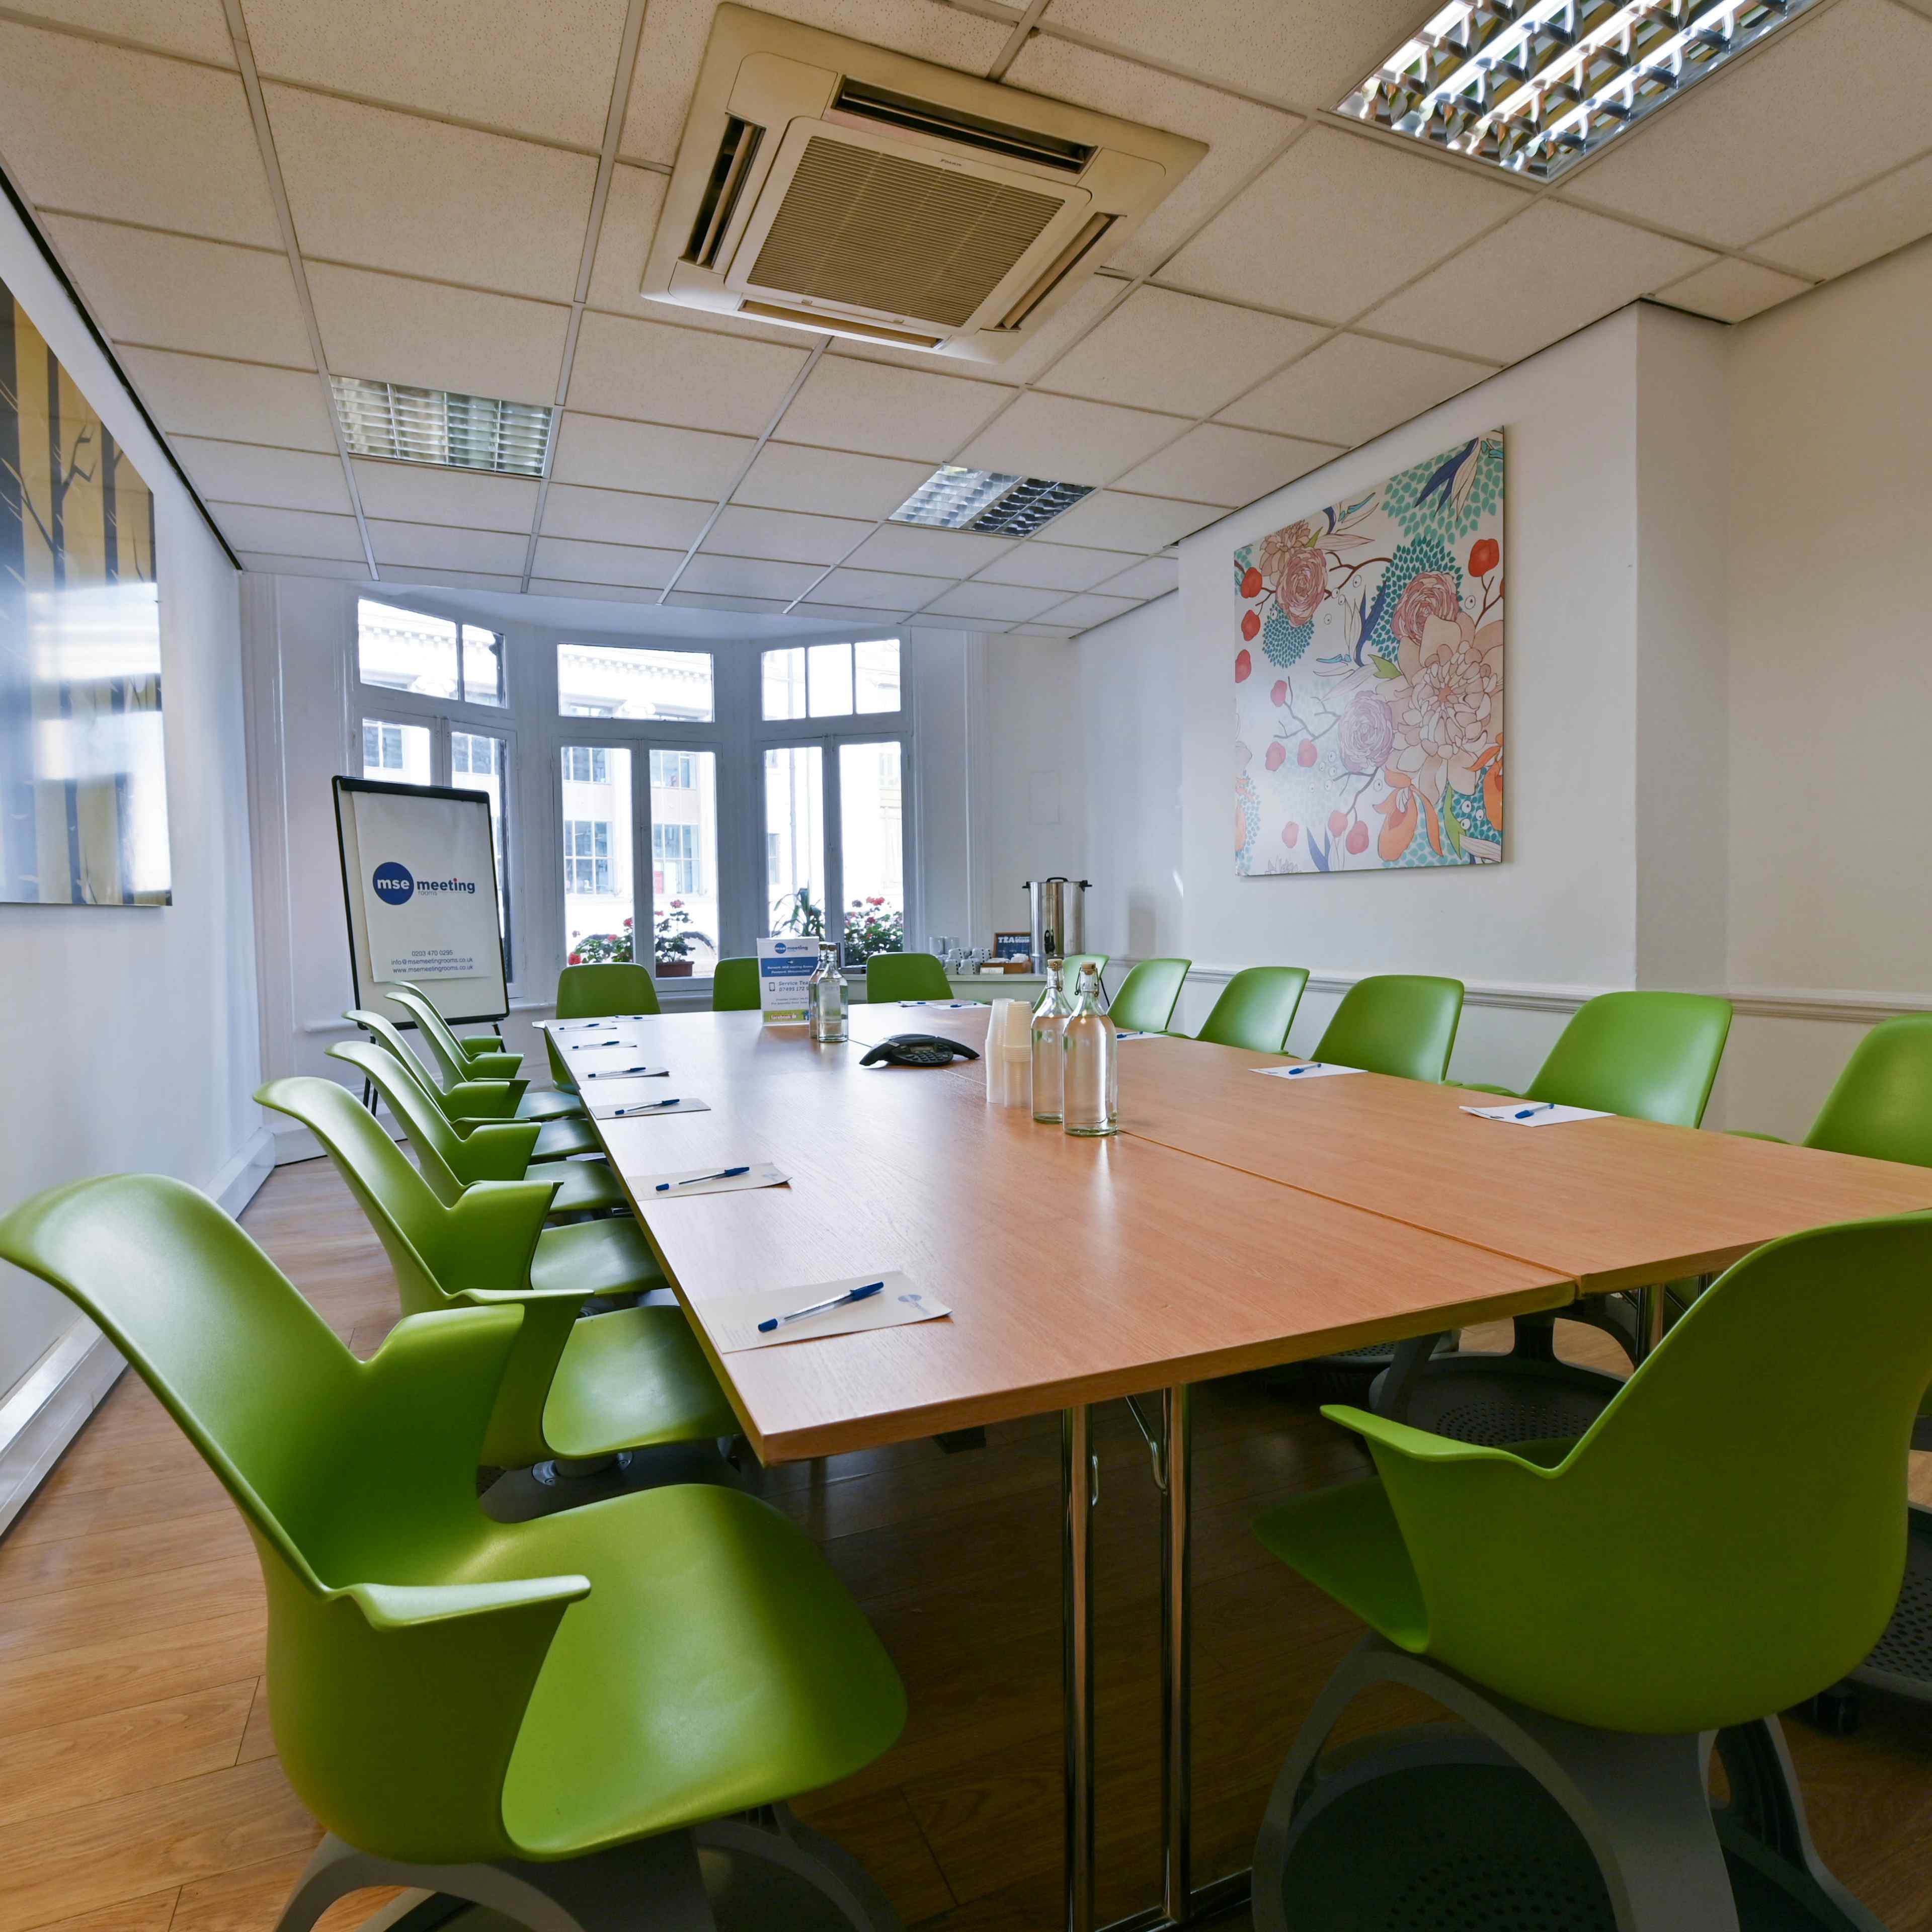 MSE Meeting Rooms - Tottenham Court Road - oslo image 1